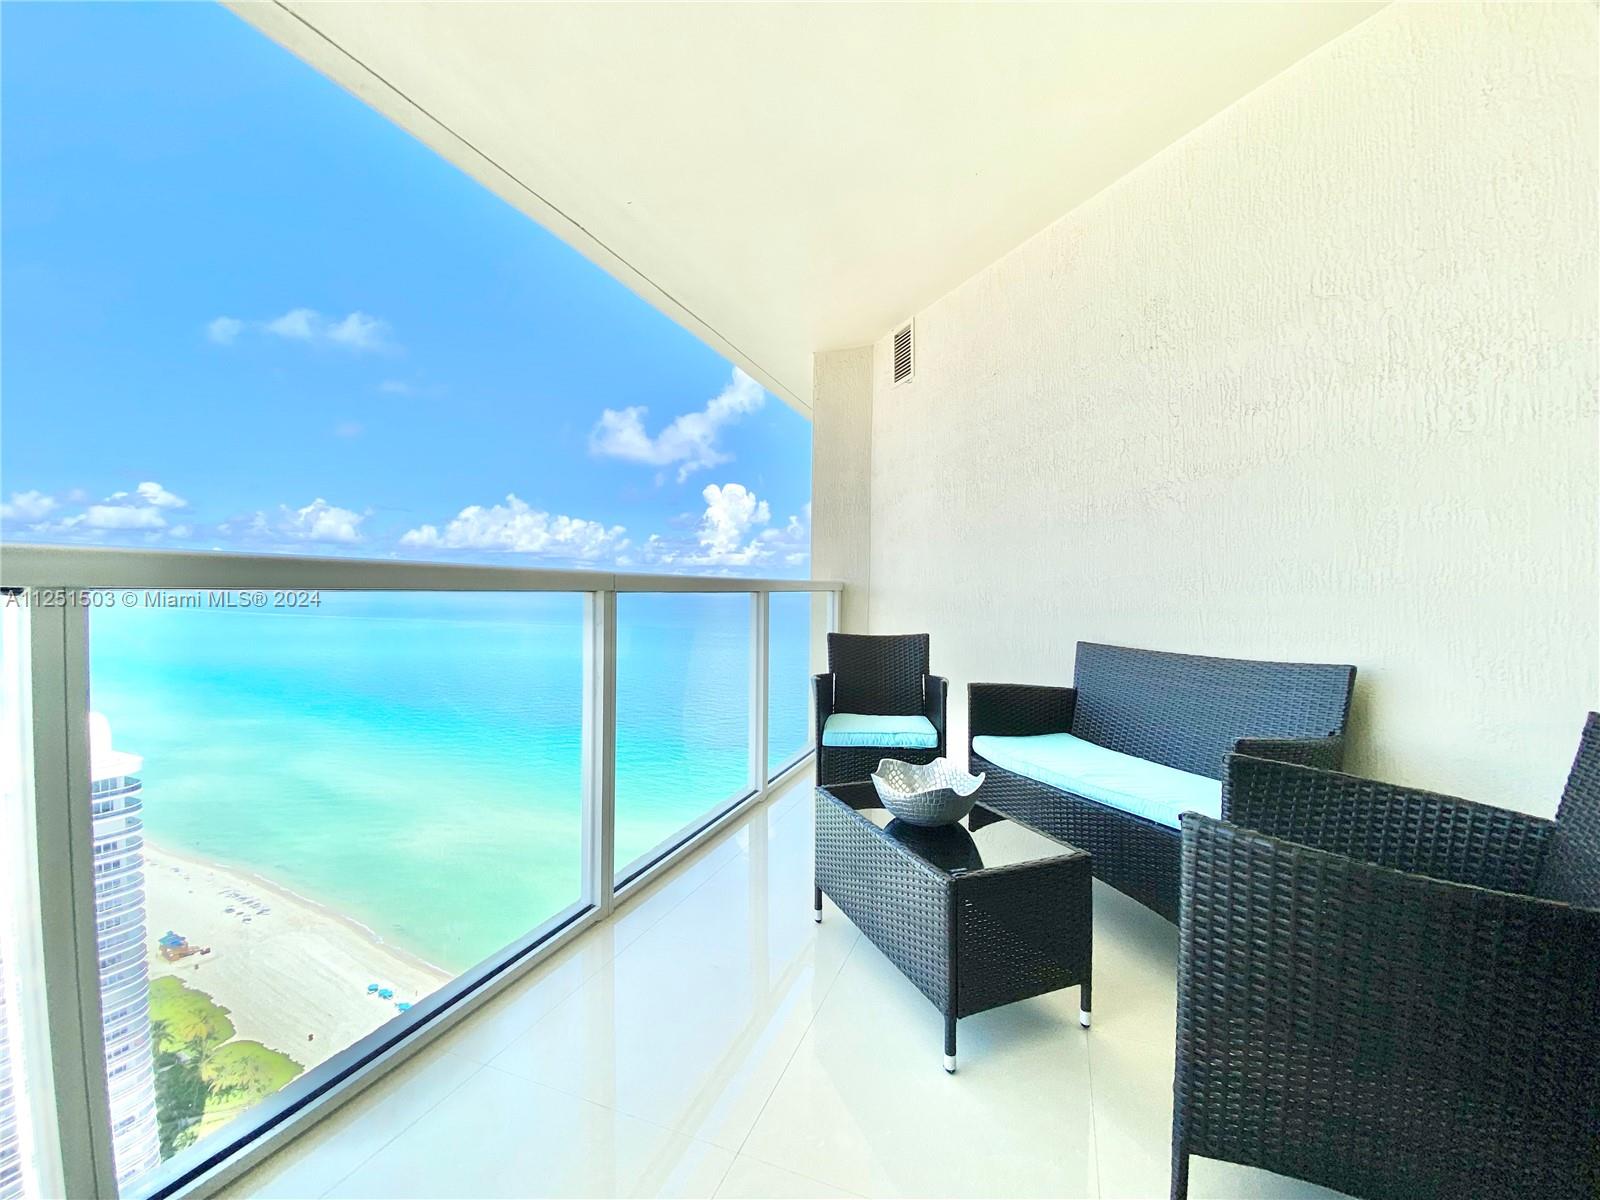 BEAUTIFUL APARTMENT WITH BREATHTAKING OCEAN VIEWS! TWO BALCONIES! FULLY FURNISHED 1 BEDROOM , 2 FULL BATHS. GORGEOUS AMENITIES: BEACH SERVICE, HEATED POOL, GYM, YOGA ROOM, PARTY ROOM, KIDS ROOM, VALET PARKING, 24 HR SECURITY AND CONCIERGE. LUXURY LA PERLA CONDO LOCATED IN THE HEART OF SUNNY ISLES BEACH! WALKING DISTANCE TO THE SHOPPING PLAZAS, CAFE, RESTAURANTS, PHARMACY, PARKS AND PLAYGROUNDS. CLOSE TO AVENTURA MALL AND BAL HARBOUR MALL! STR-02336. Available from July 2 , 2024.